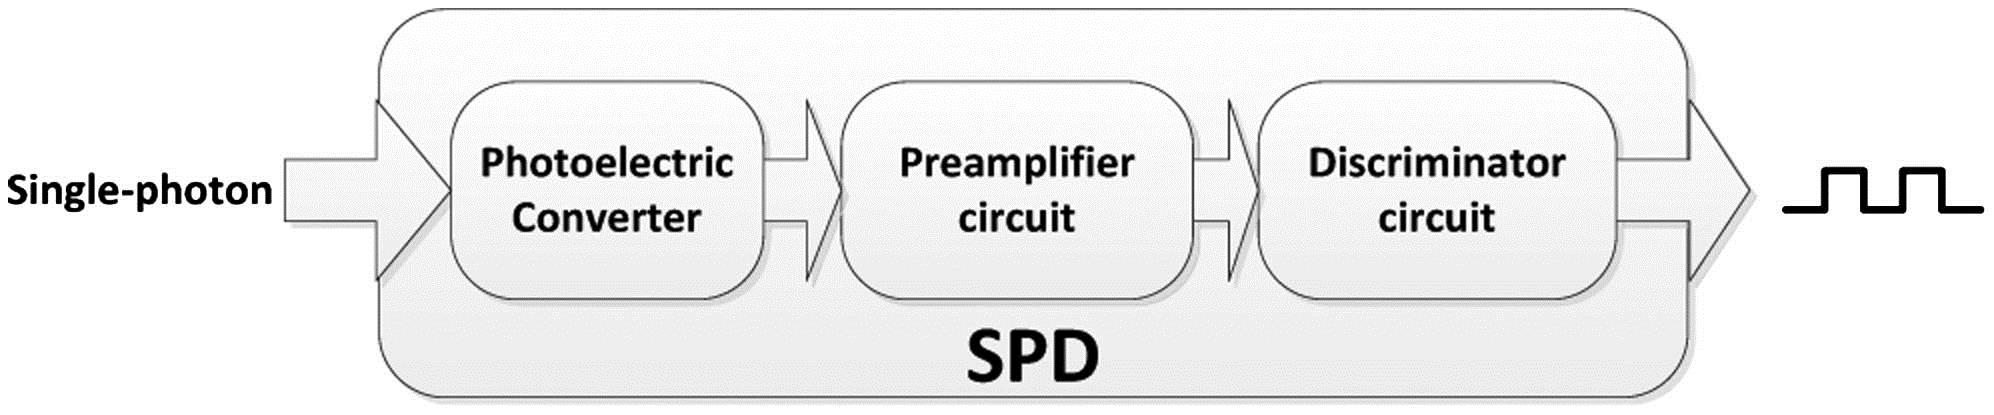 Principle and internal configuration of the SPD.